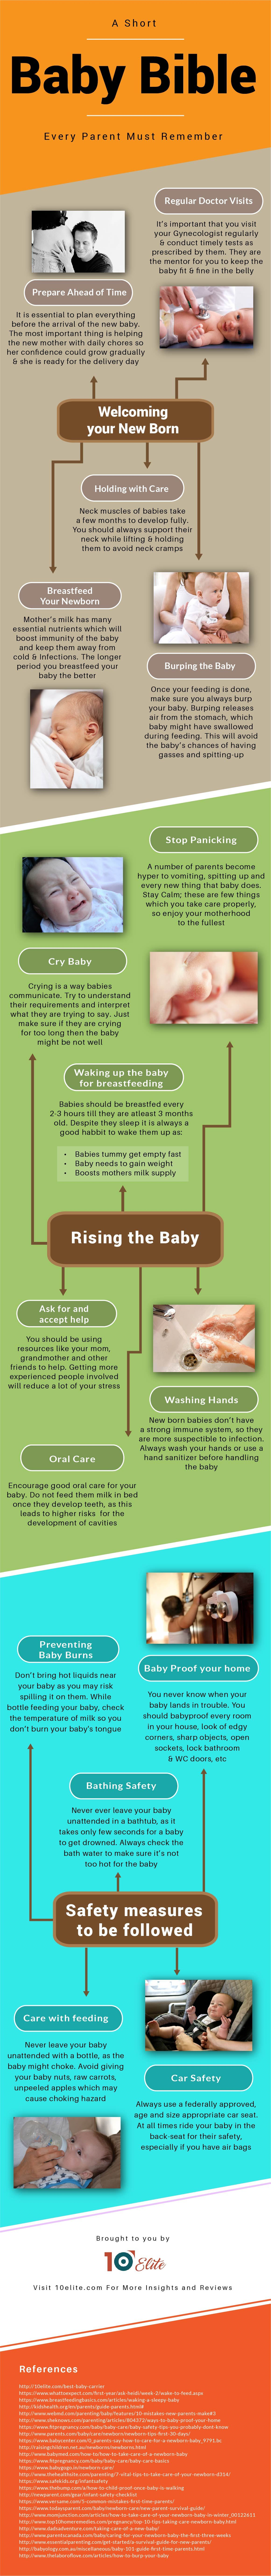 Infographic - A Short Baby Bible